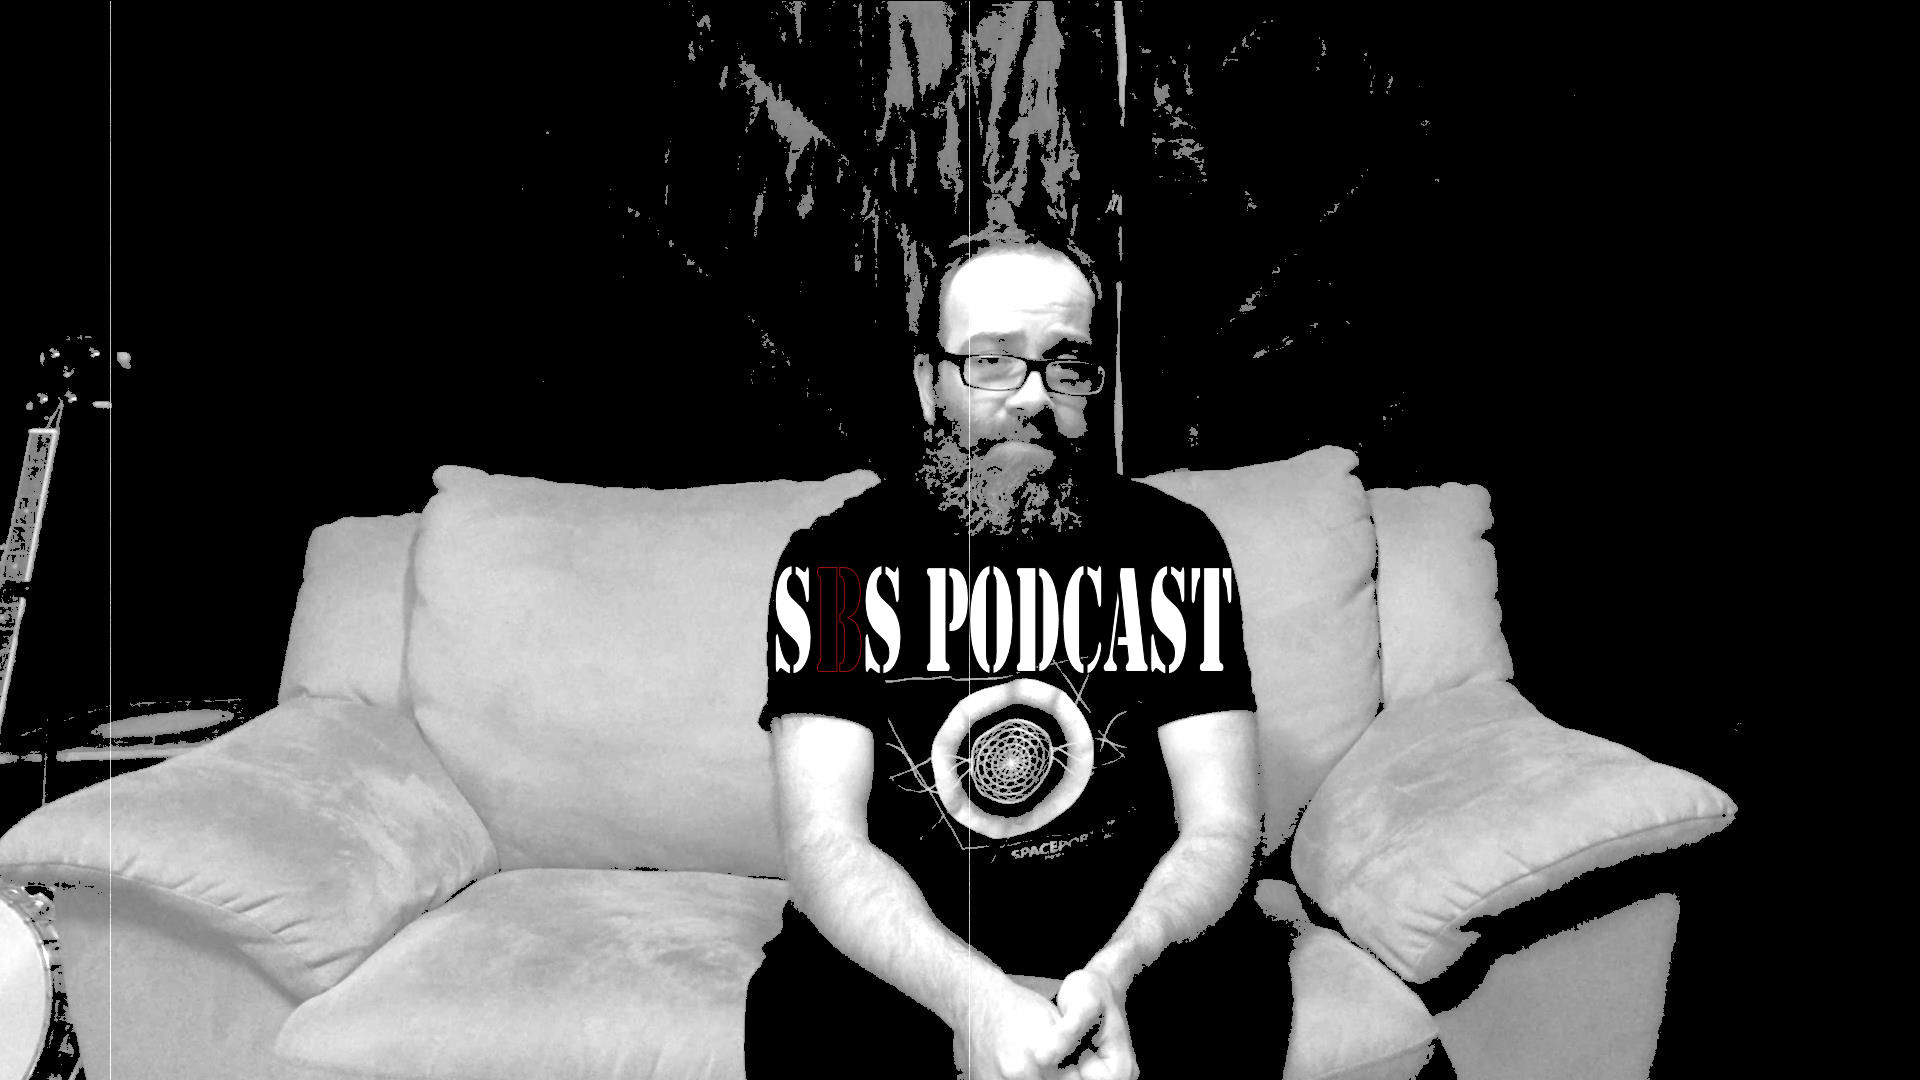  SBS Podcast 033